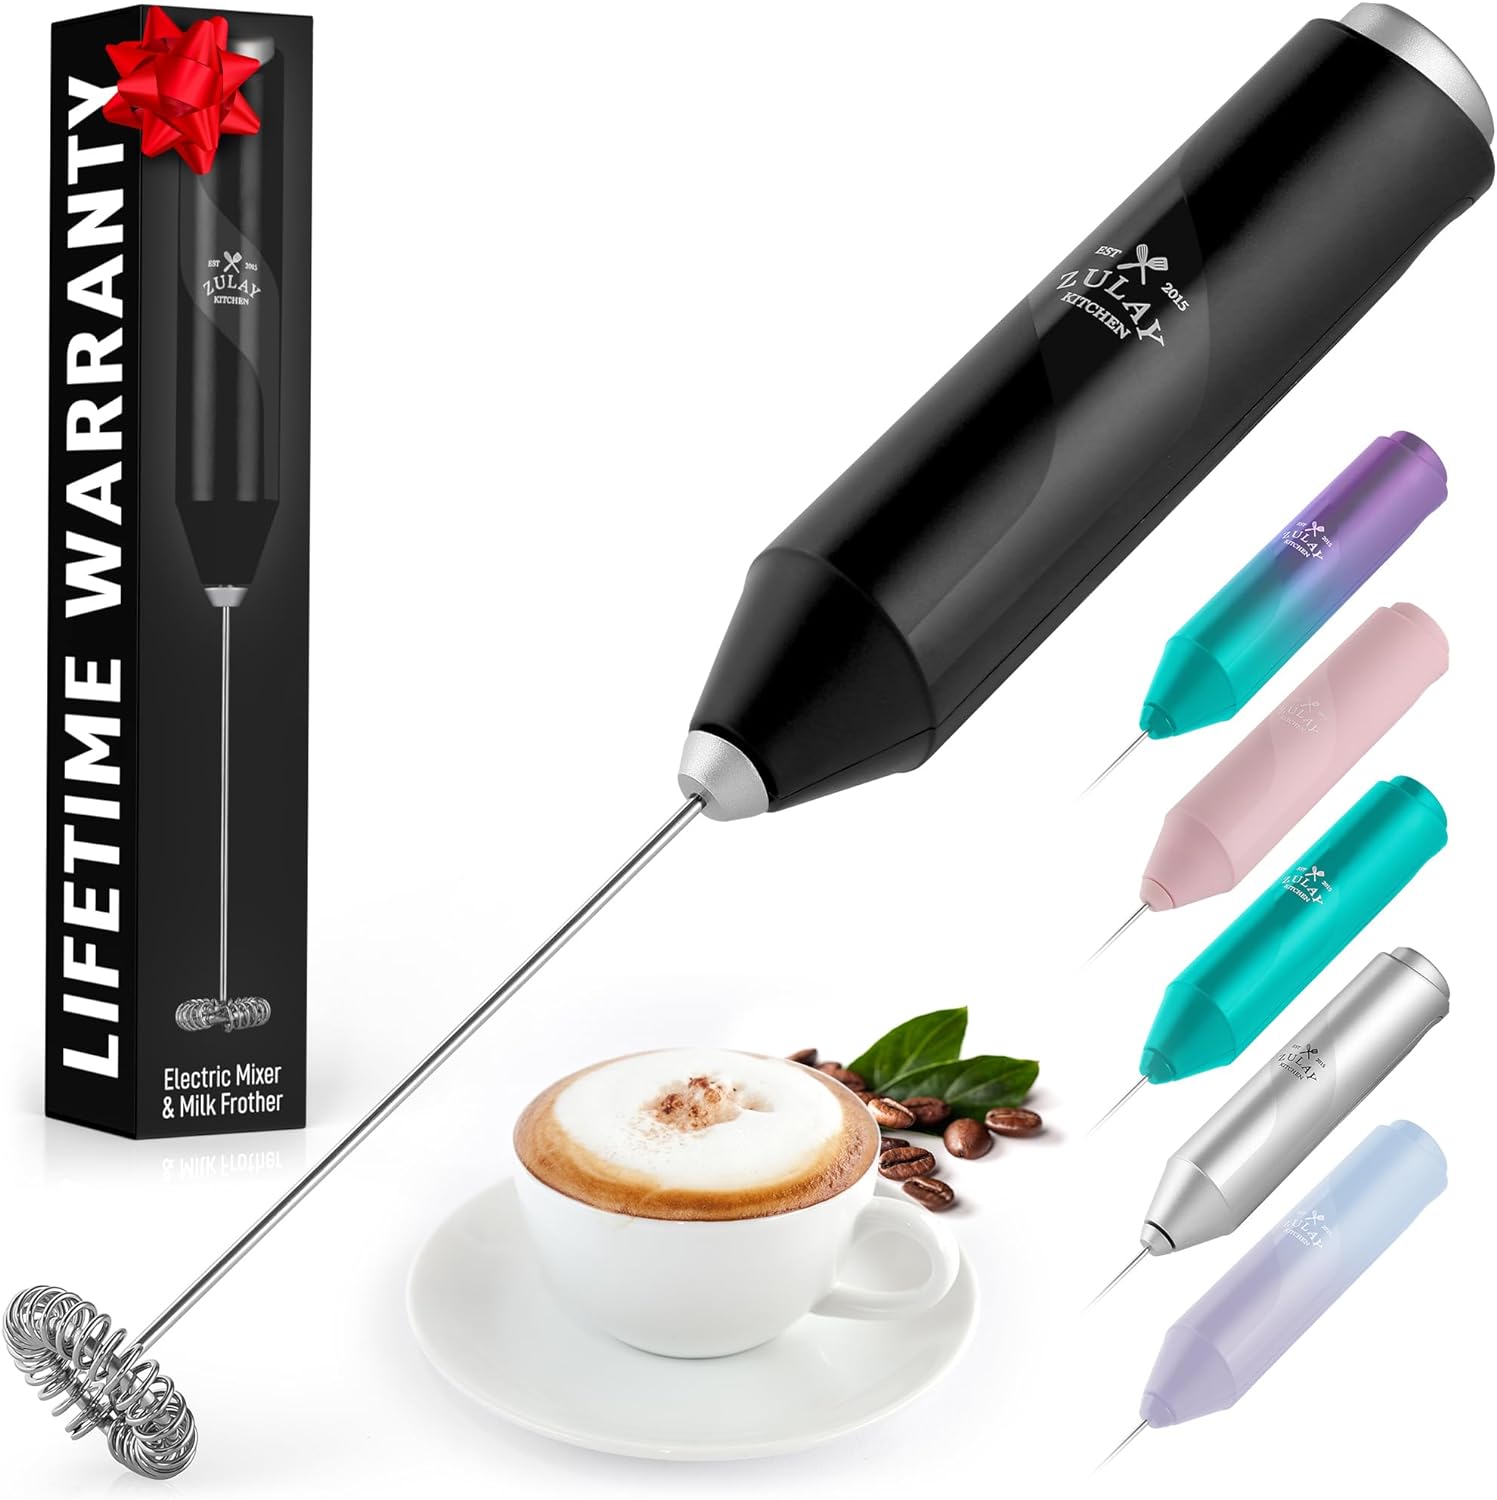 FrothMate Powerful Milk Frother Handheld - Drink Mixer for Coffee, Lattes, Cappuccinos, Matcha - Mini Milk Frother and Foamer Whisk - Electric Frother Battery Operated (Not Included) No Stand, Black